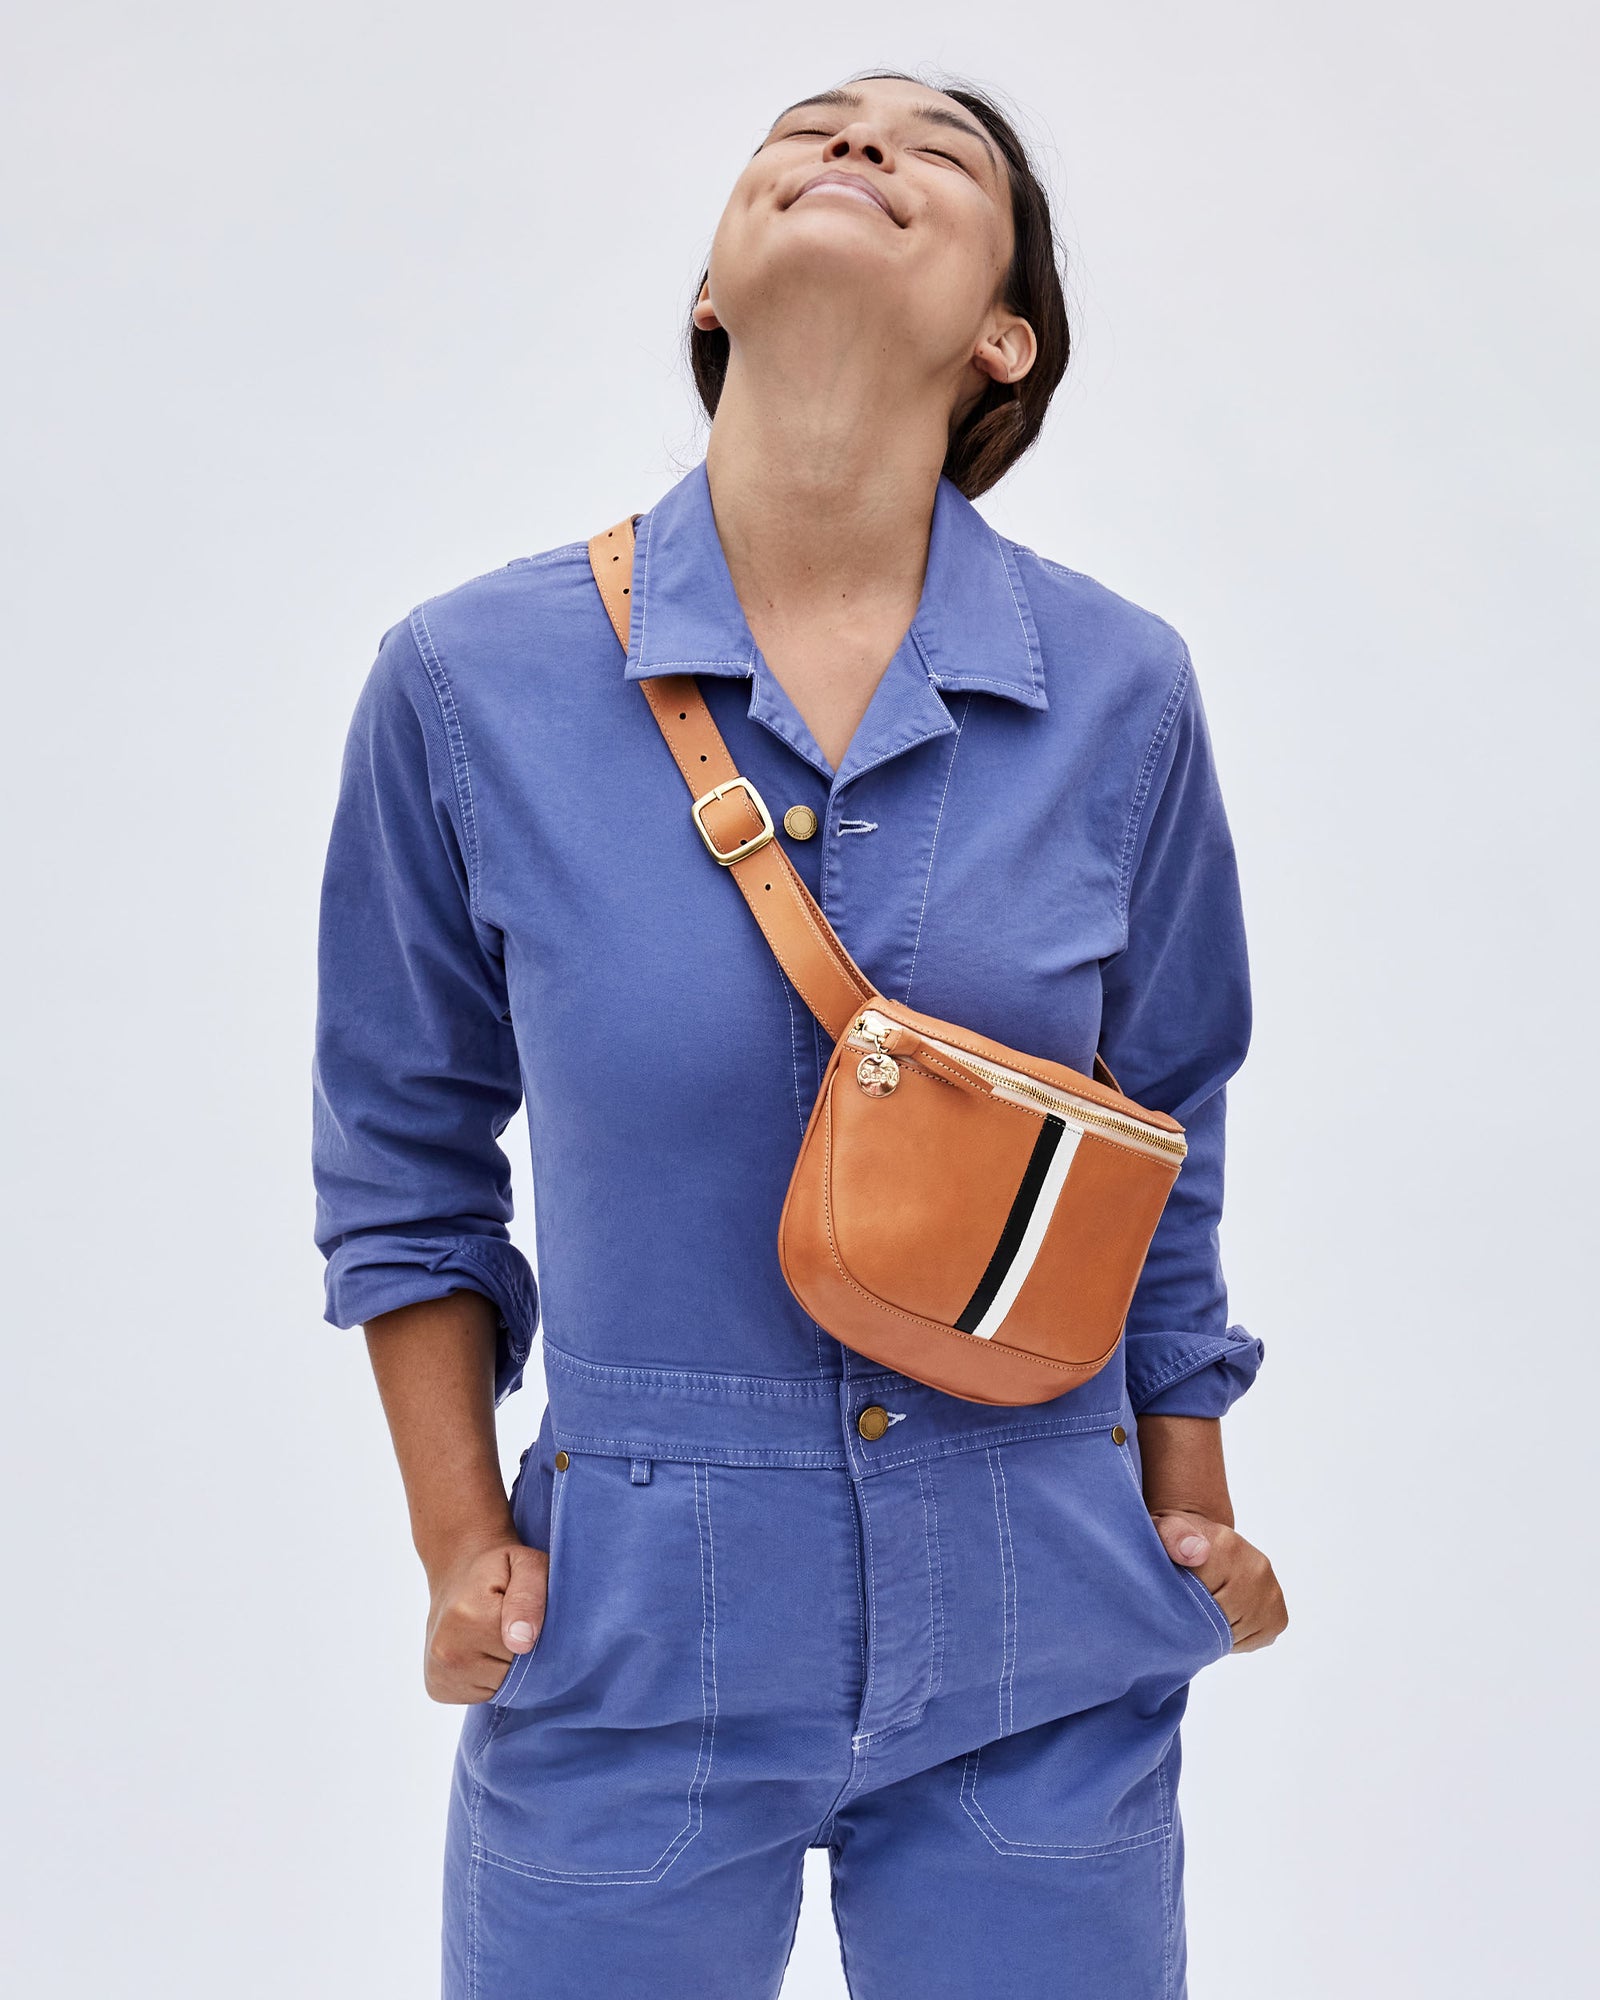 Clare V. Fanny Pack in Blue